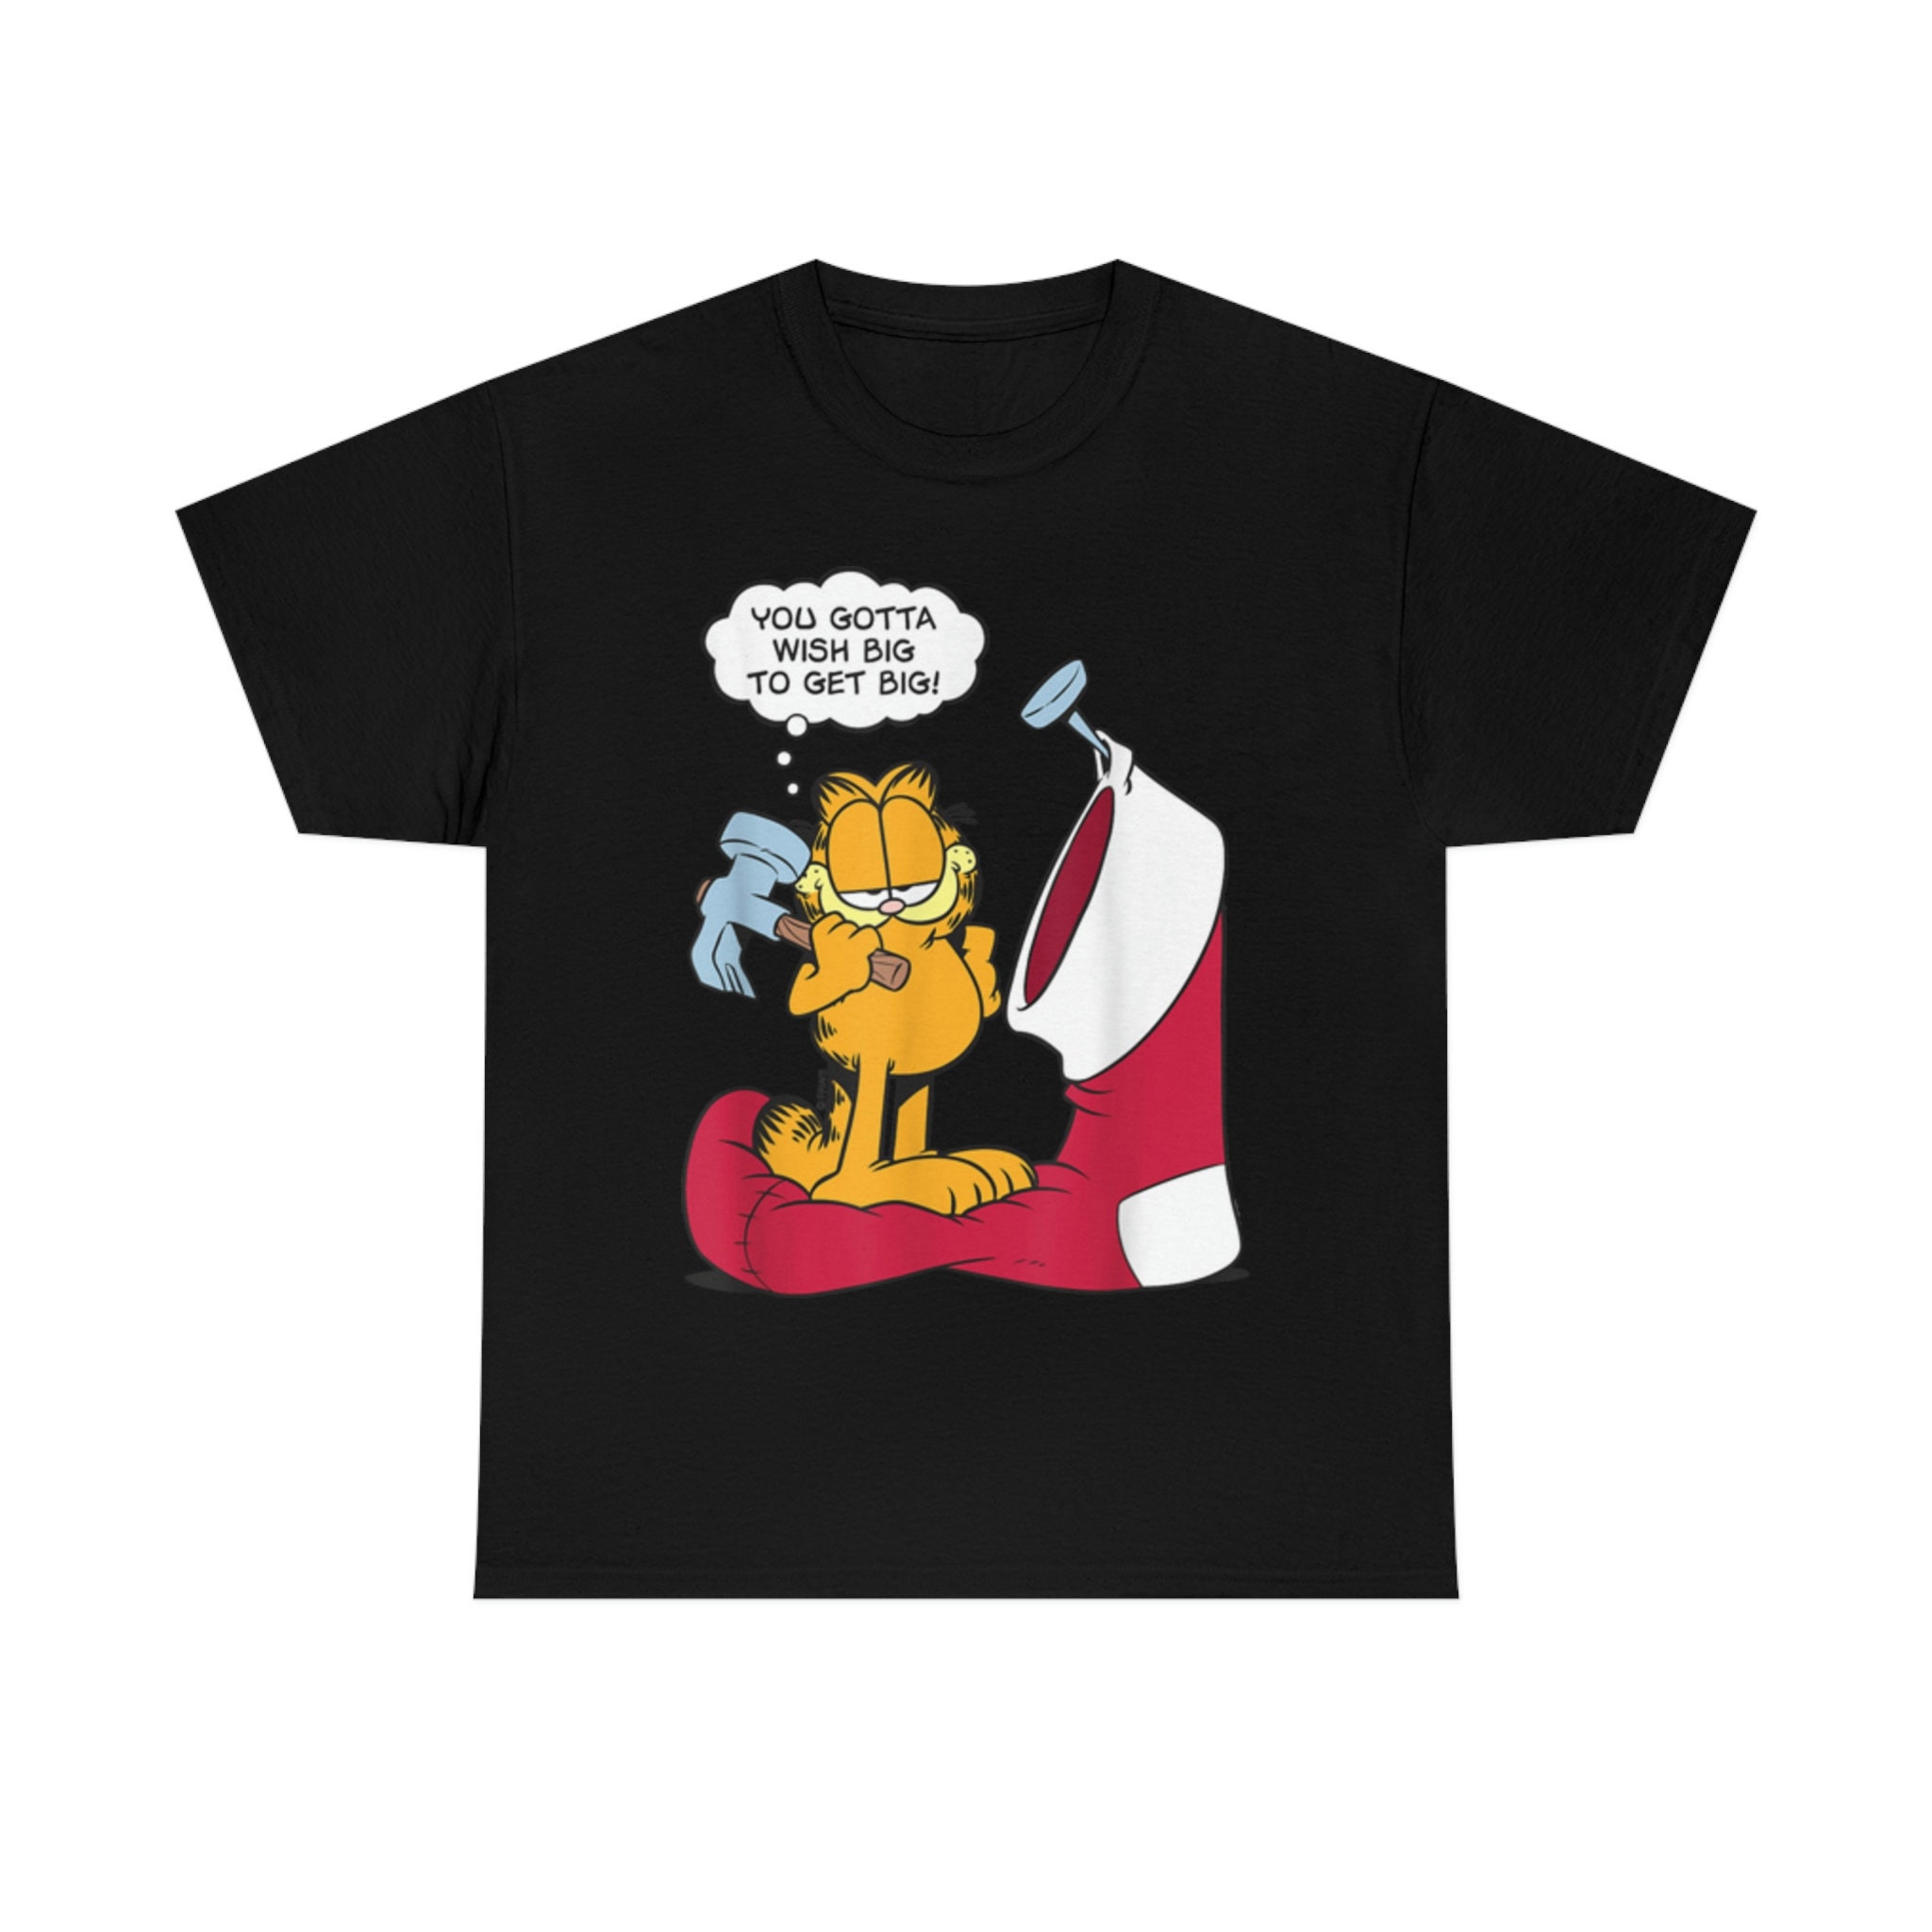 Roblox Is The Worst Game Funny Roblox Shirt, Hoodie